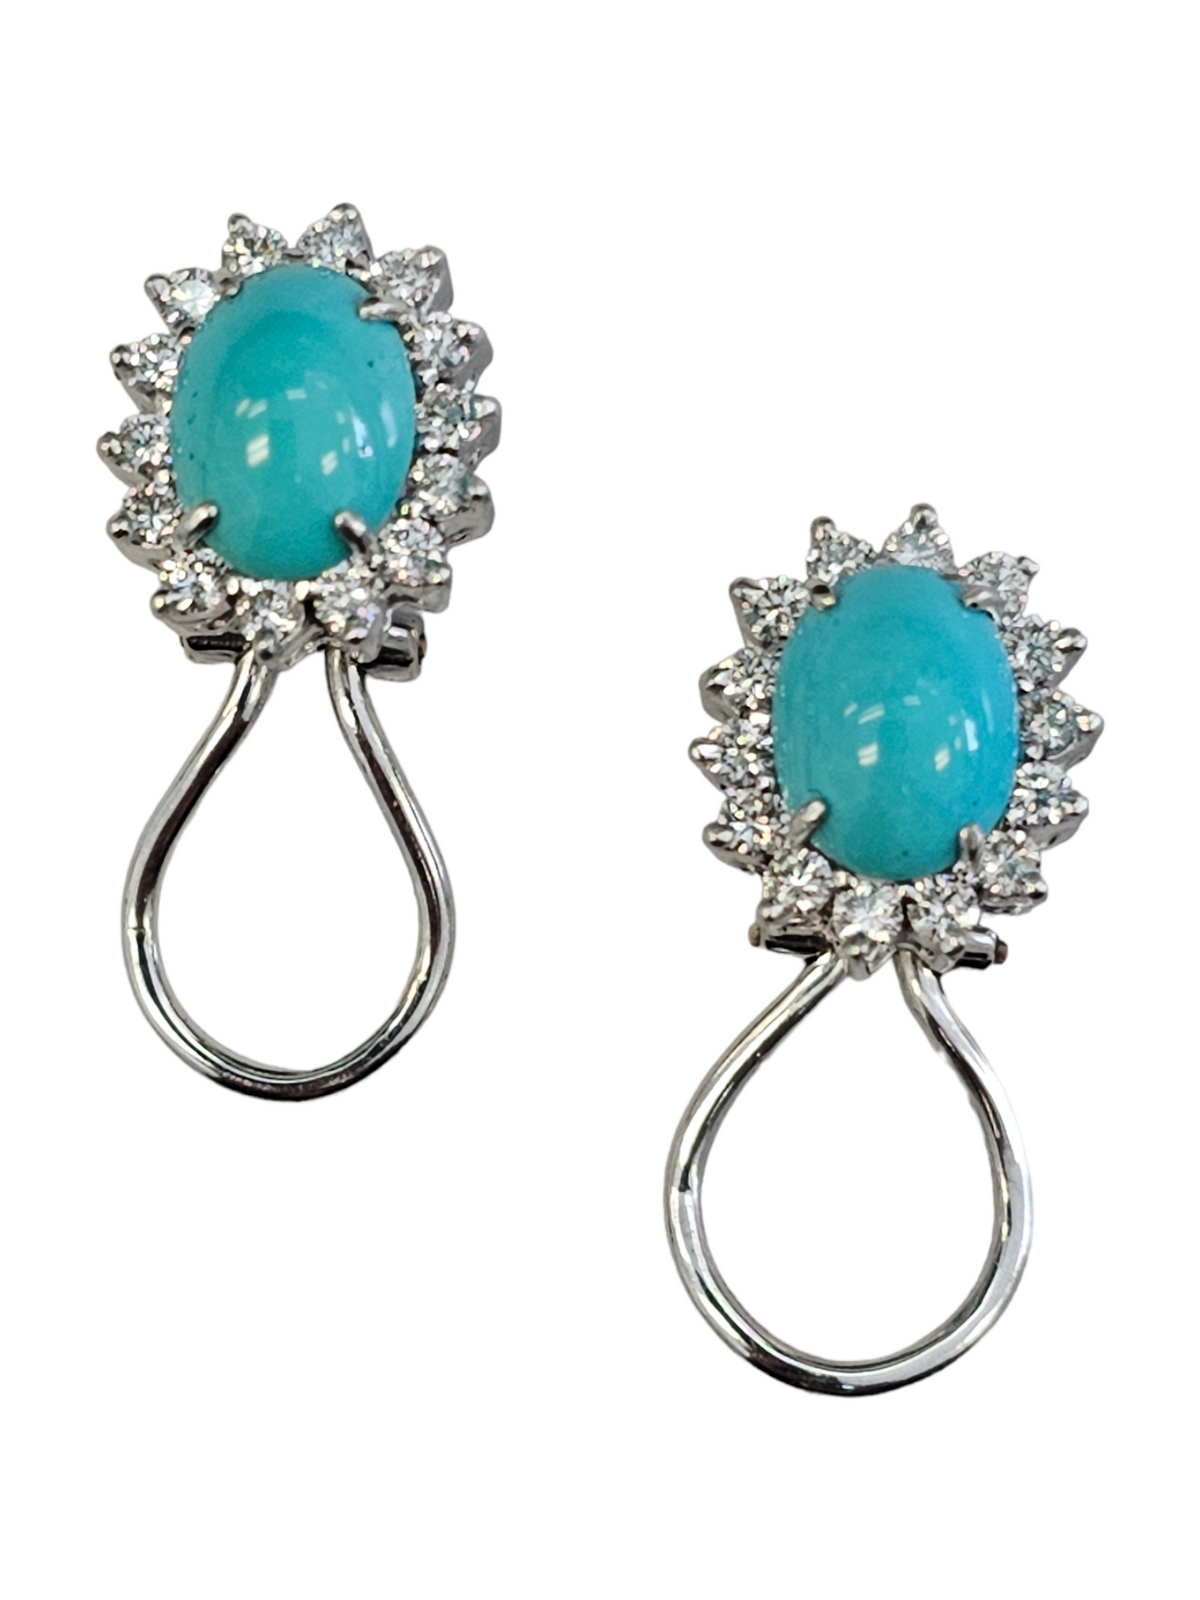 Persian Torquoise with Diamond Halo,  Clip Earrings, 18kt White Gold